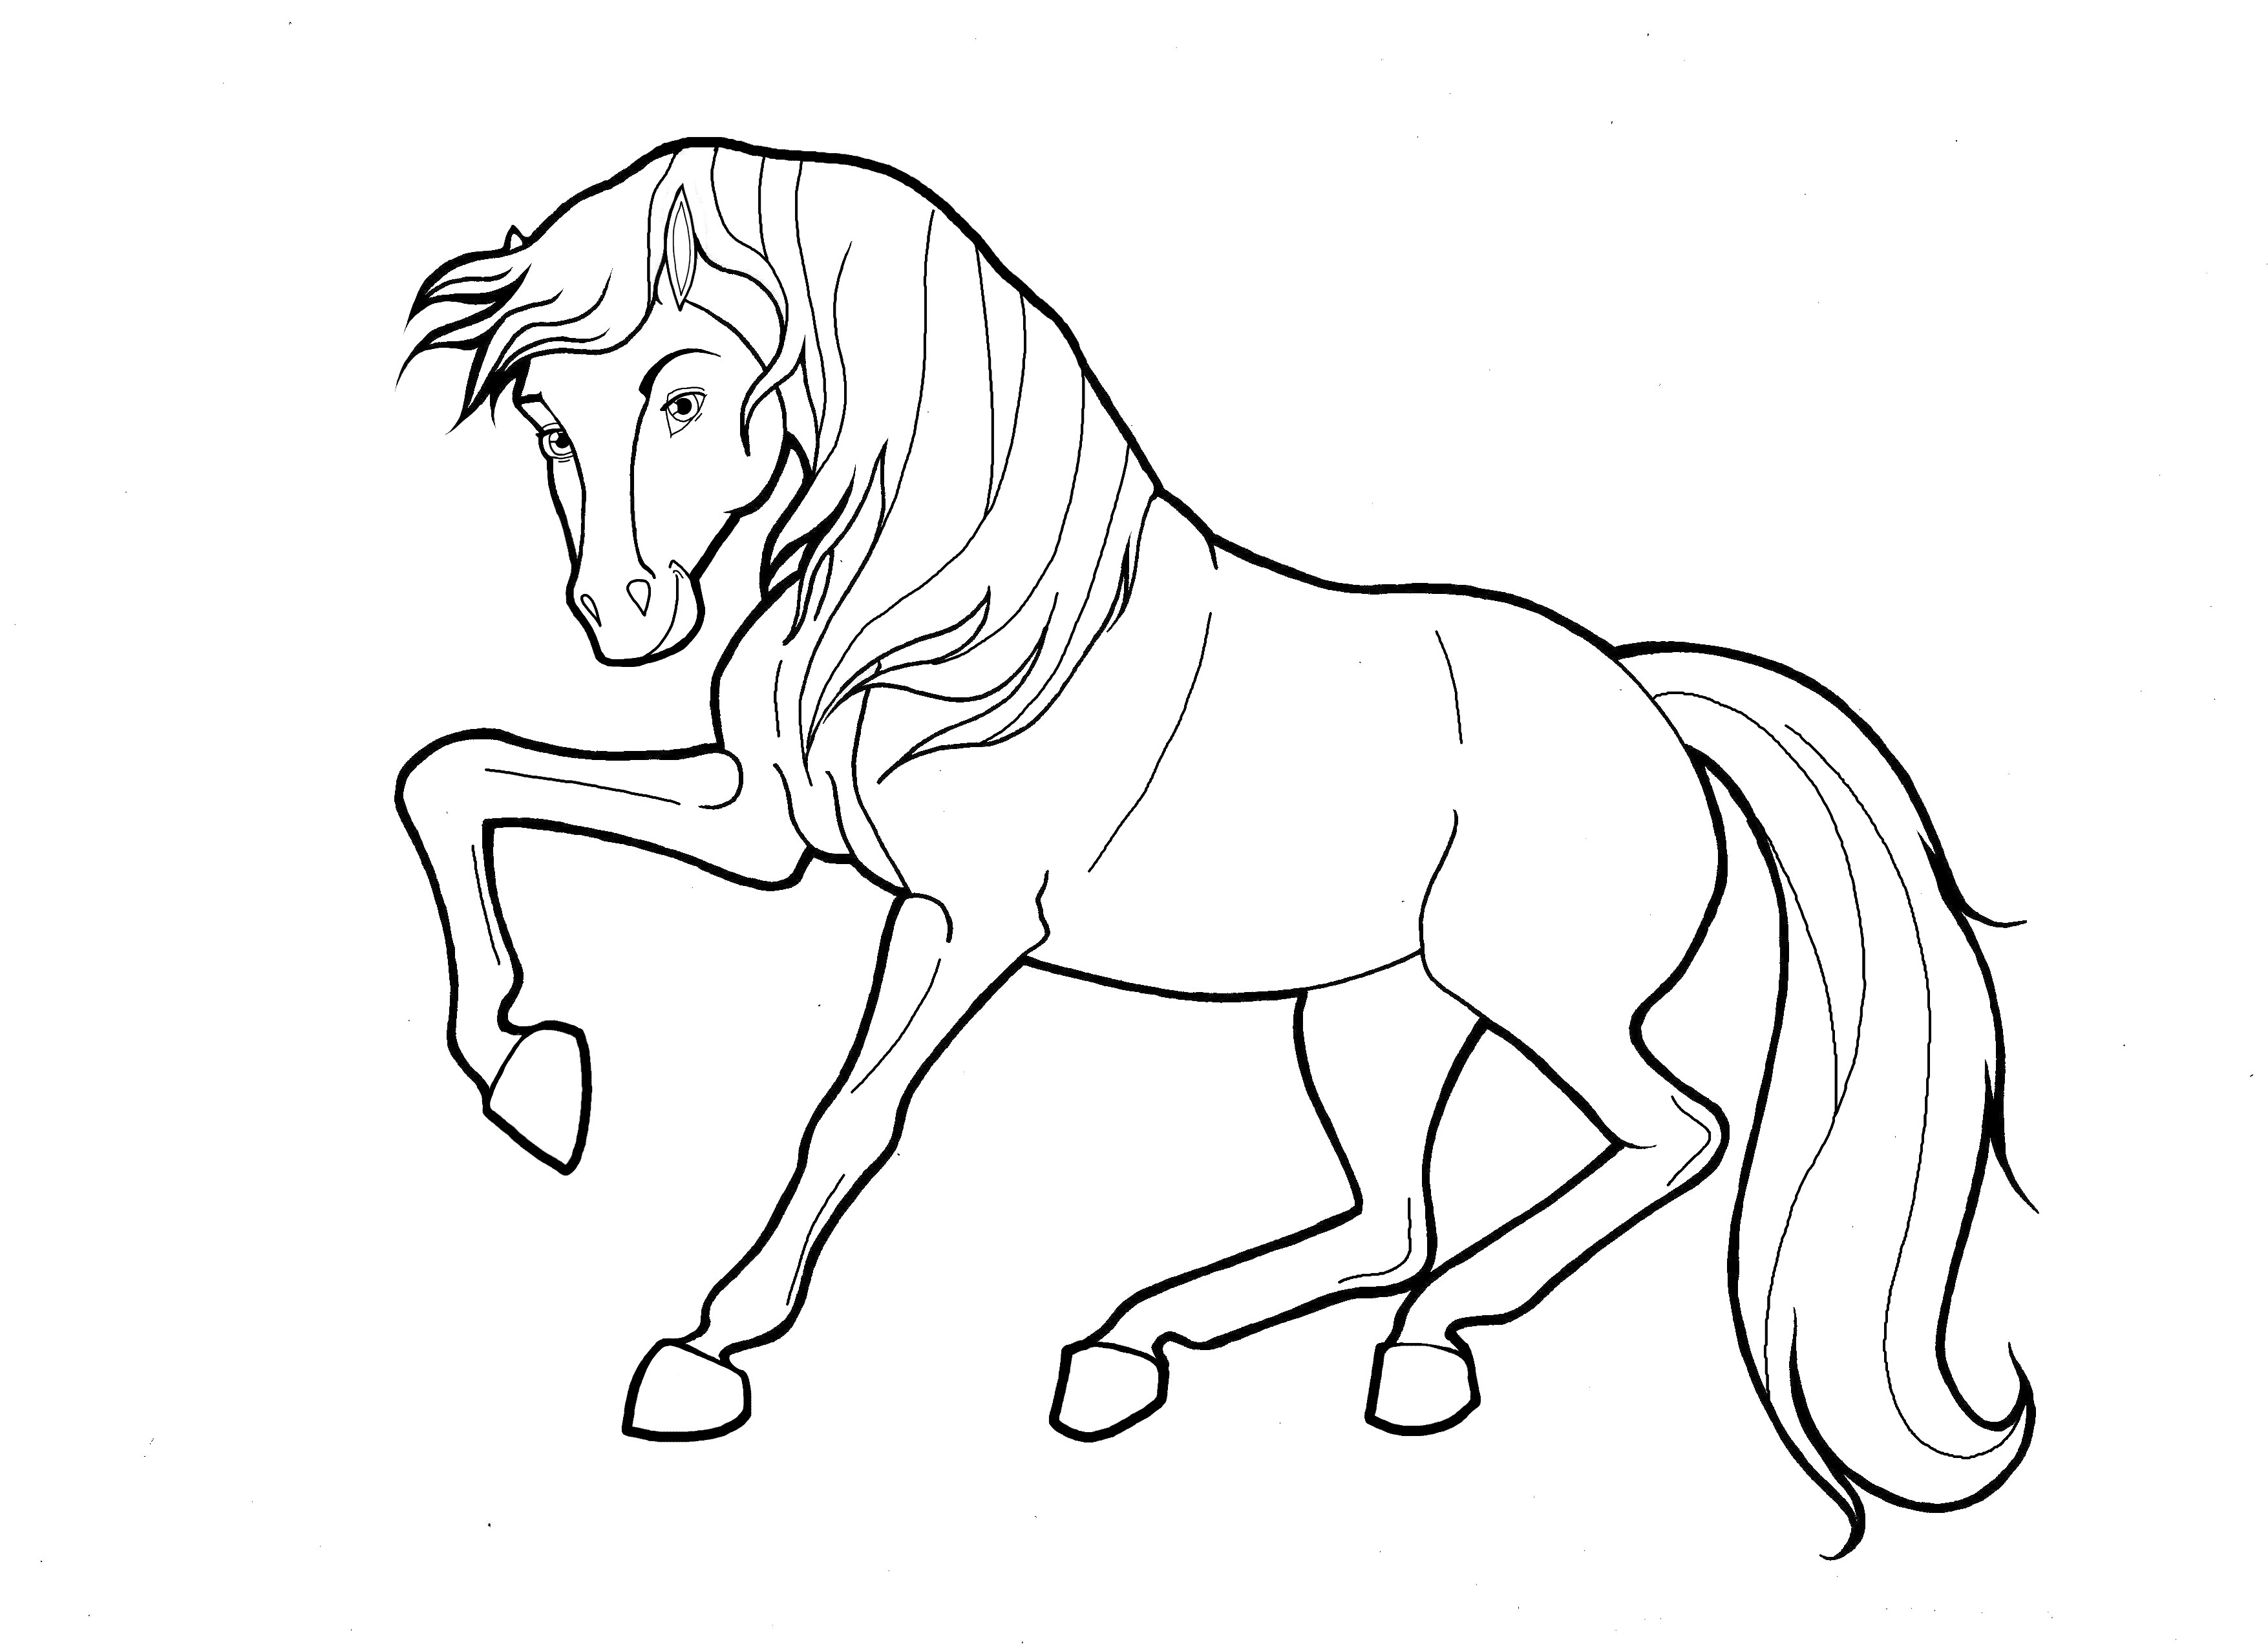 Spirit Riding Free Coloring Pages at GetColoringscom